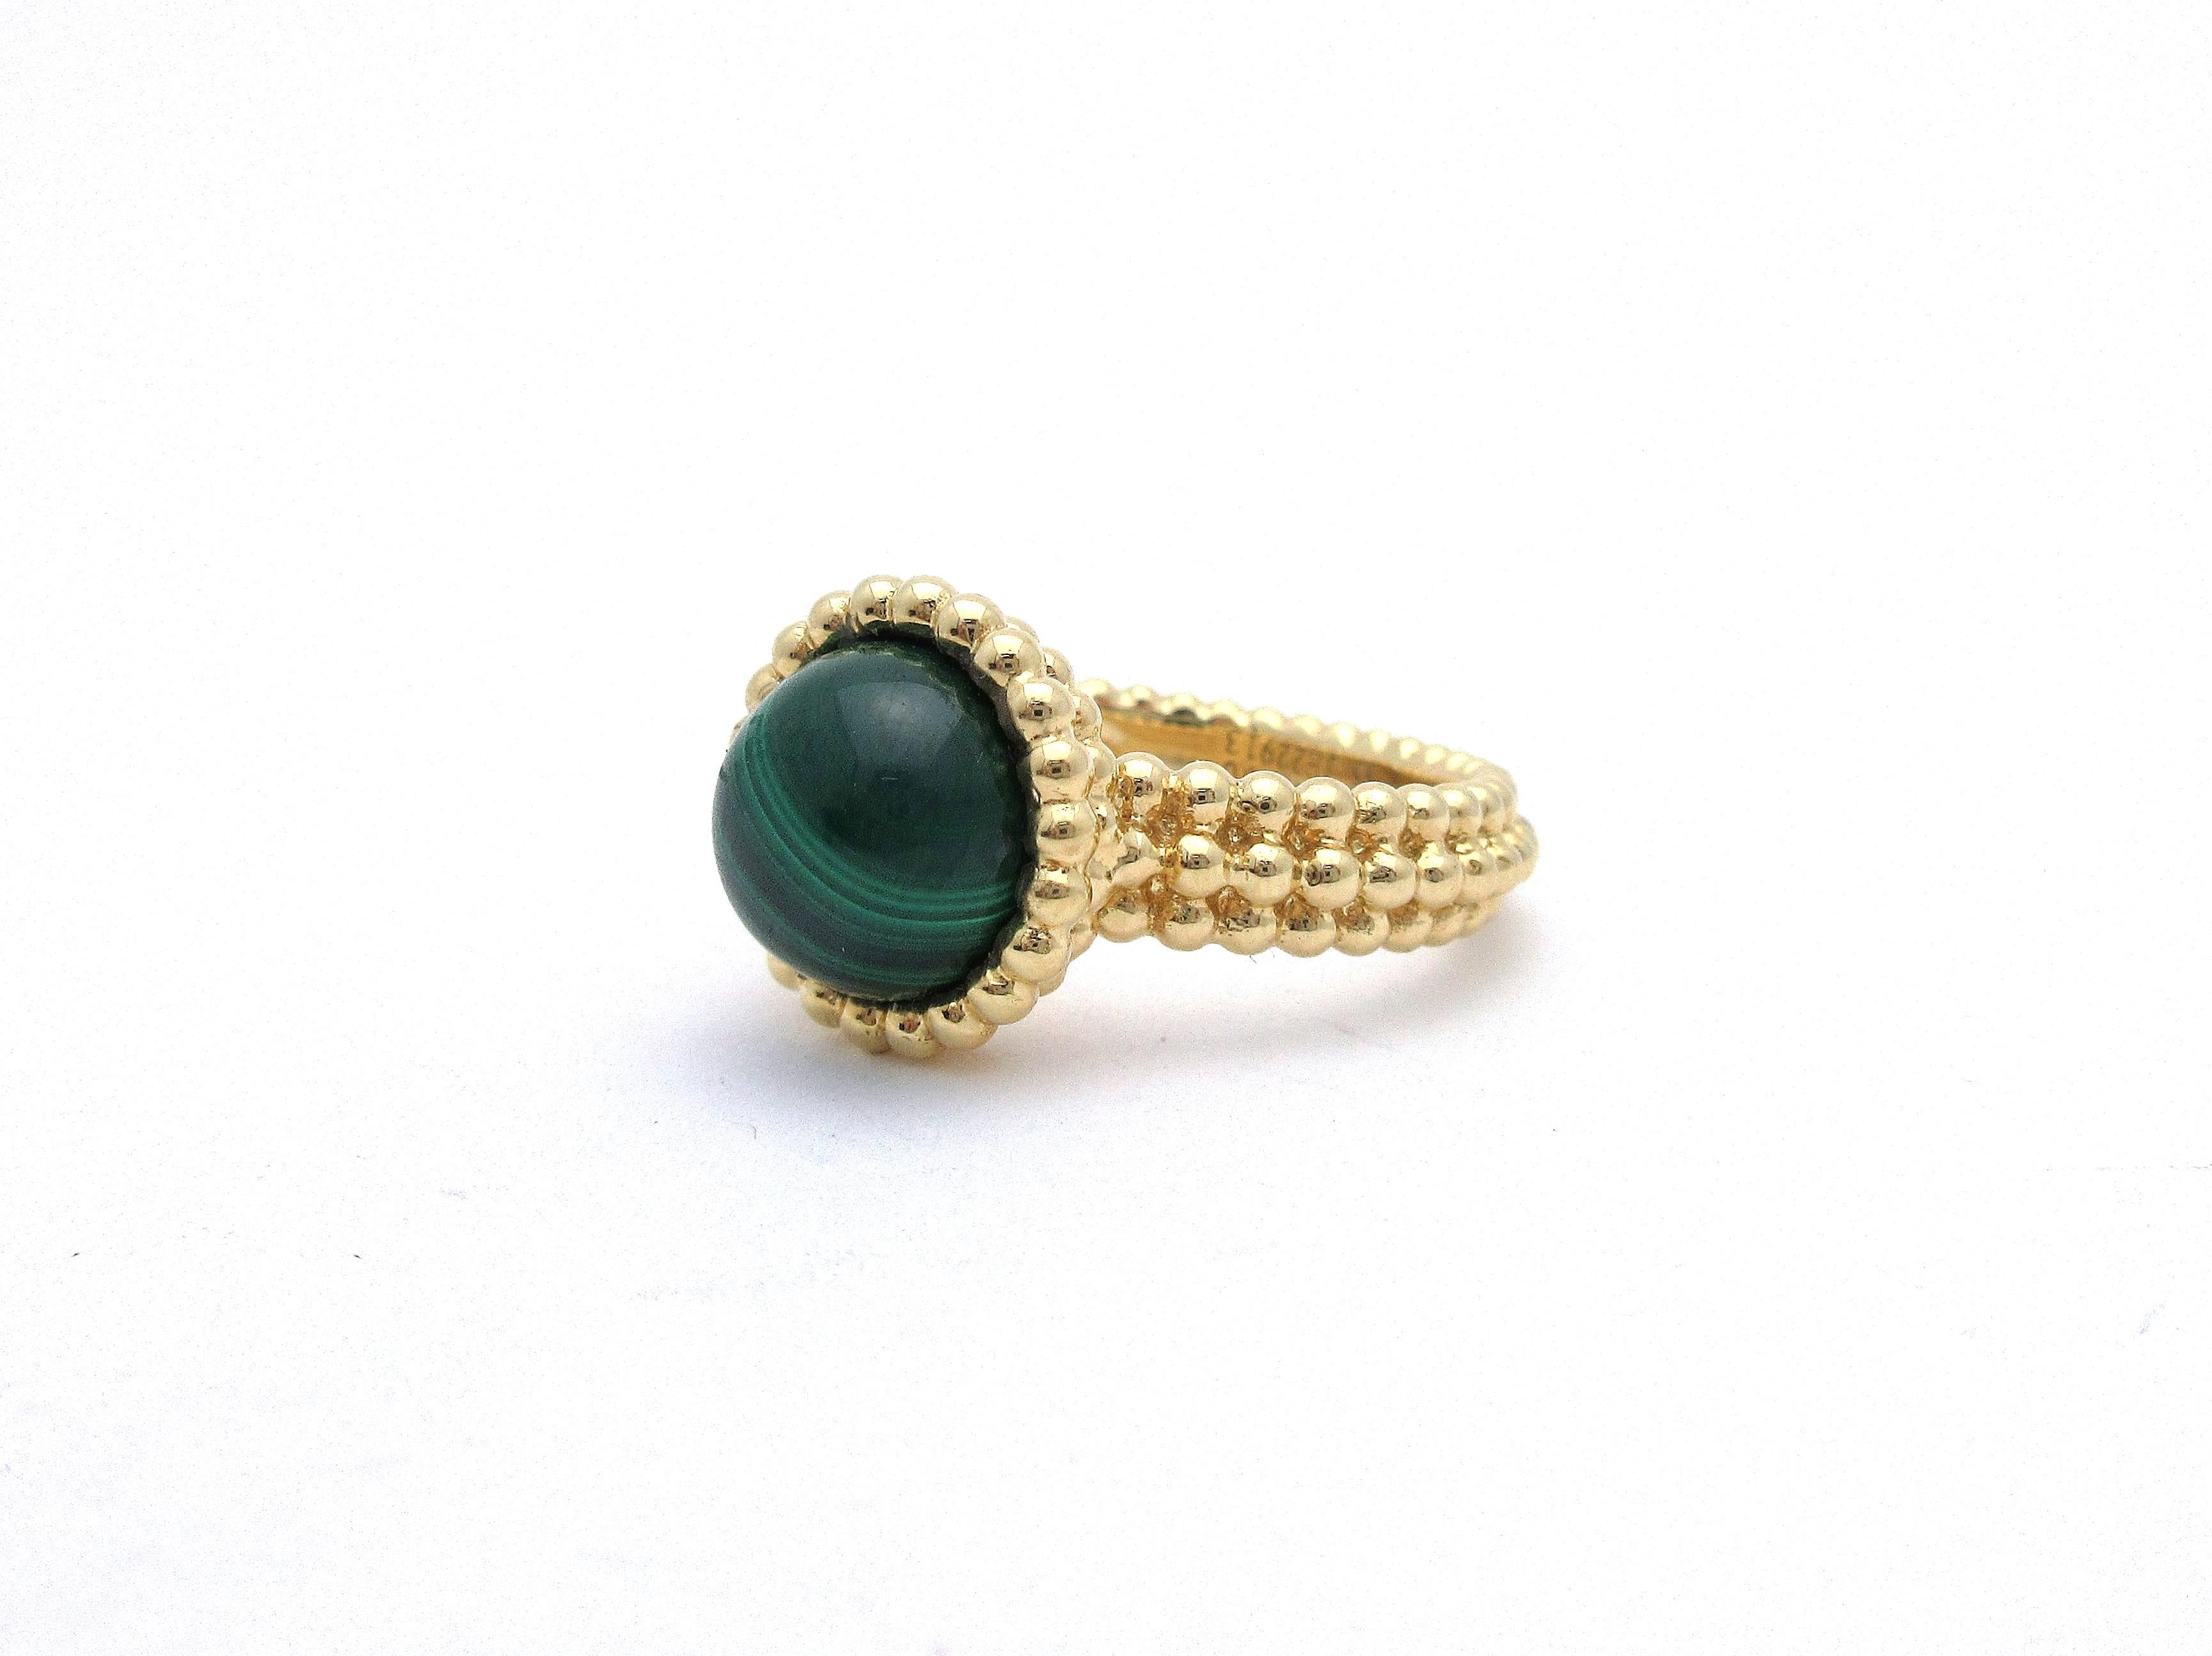 This beautiful ring by Van Cleef and Arpels is from the Perlee Couleurs collection and set with a green malachite cabochon.  Made from 18k yellow gold, the ring features beaded details all the way around.  It is a size 55, and the ring face measures